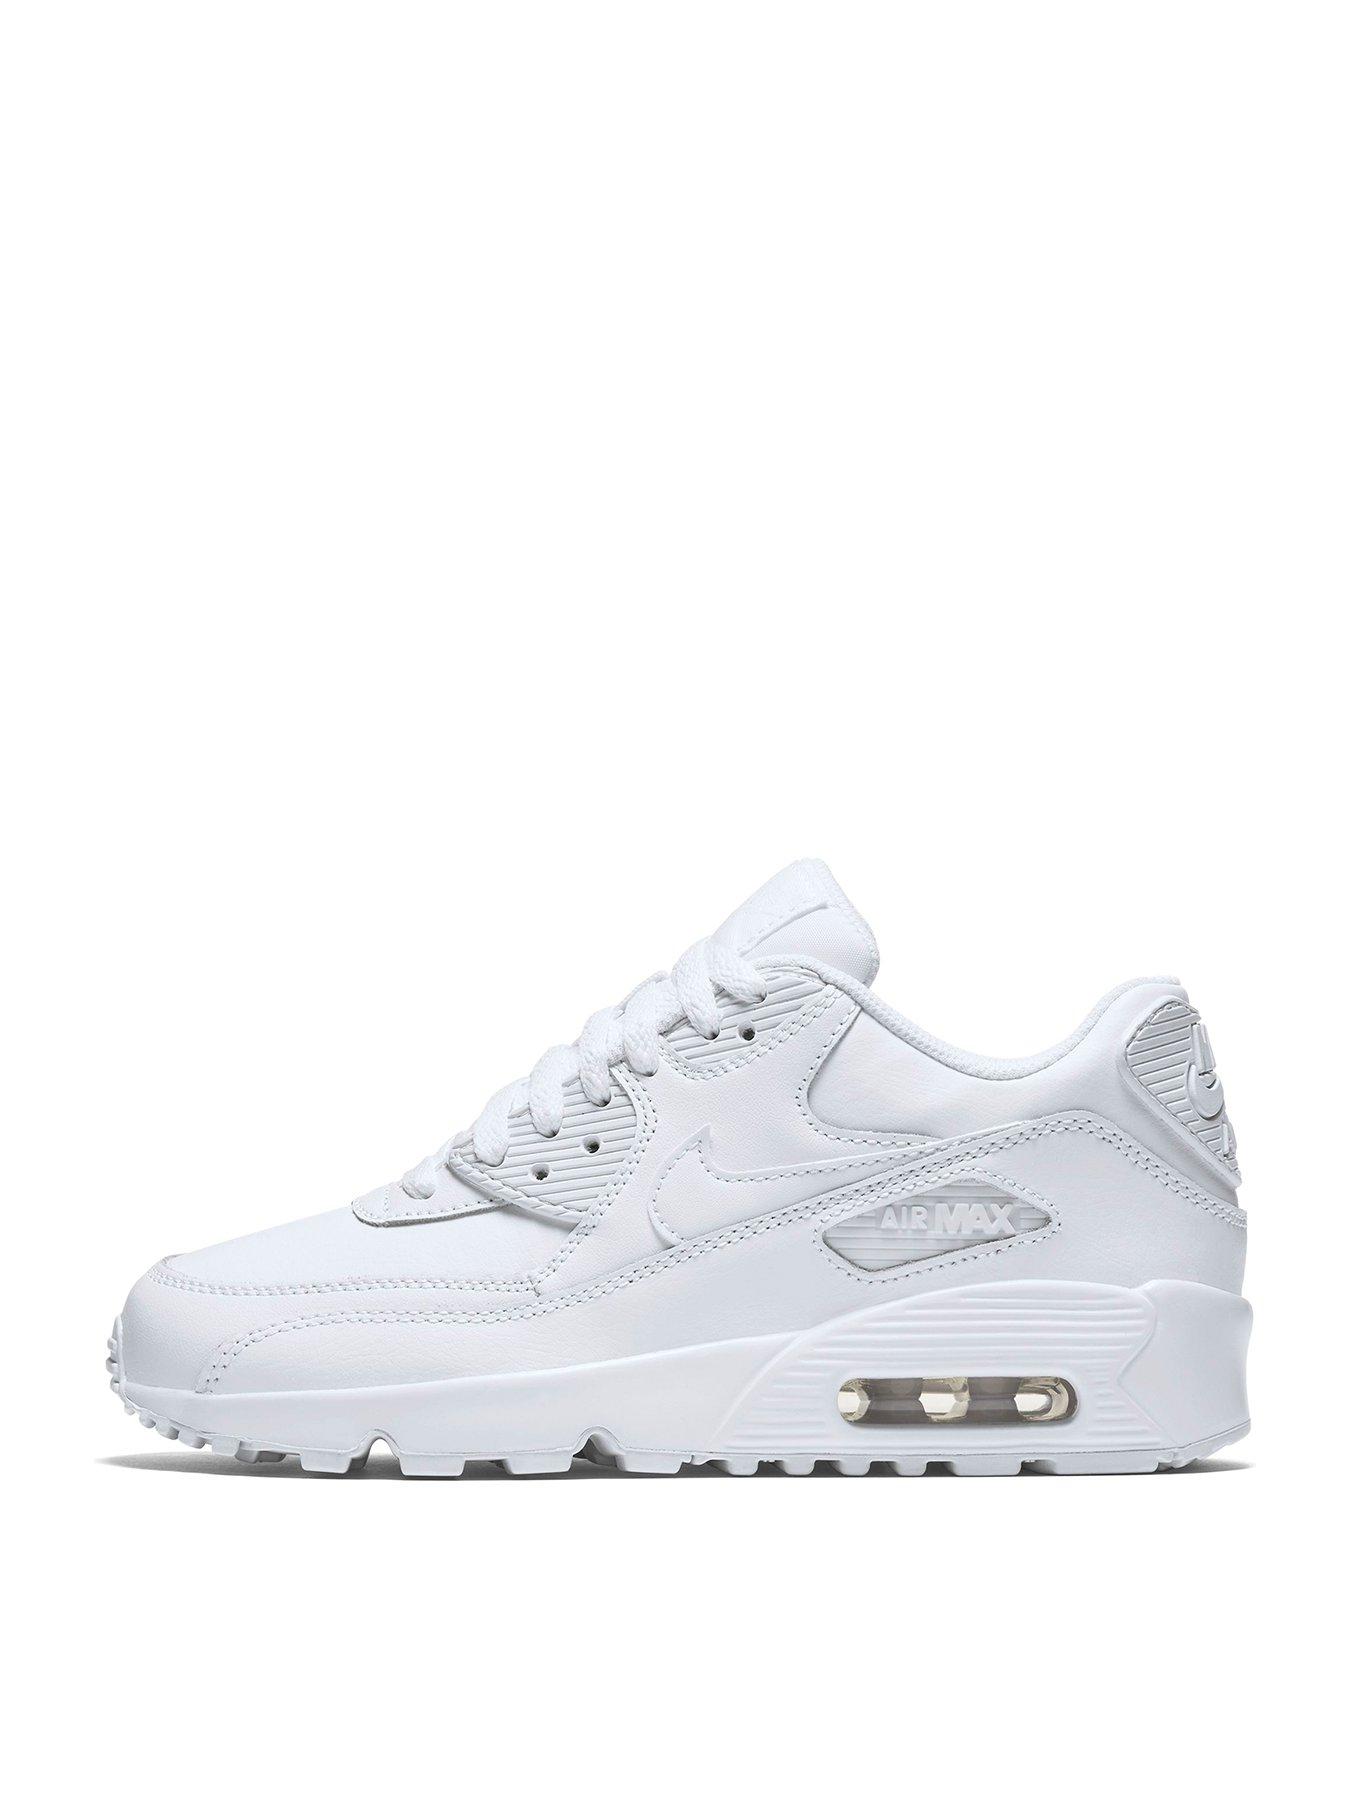 Nike AIR MAX 90 MESH JUNIOR Shoes prices and opinion